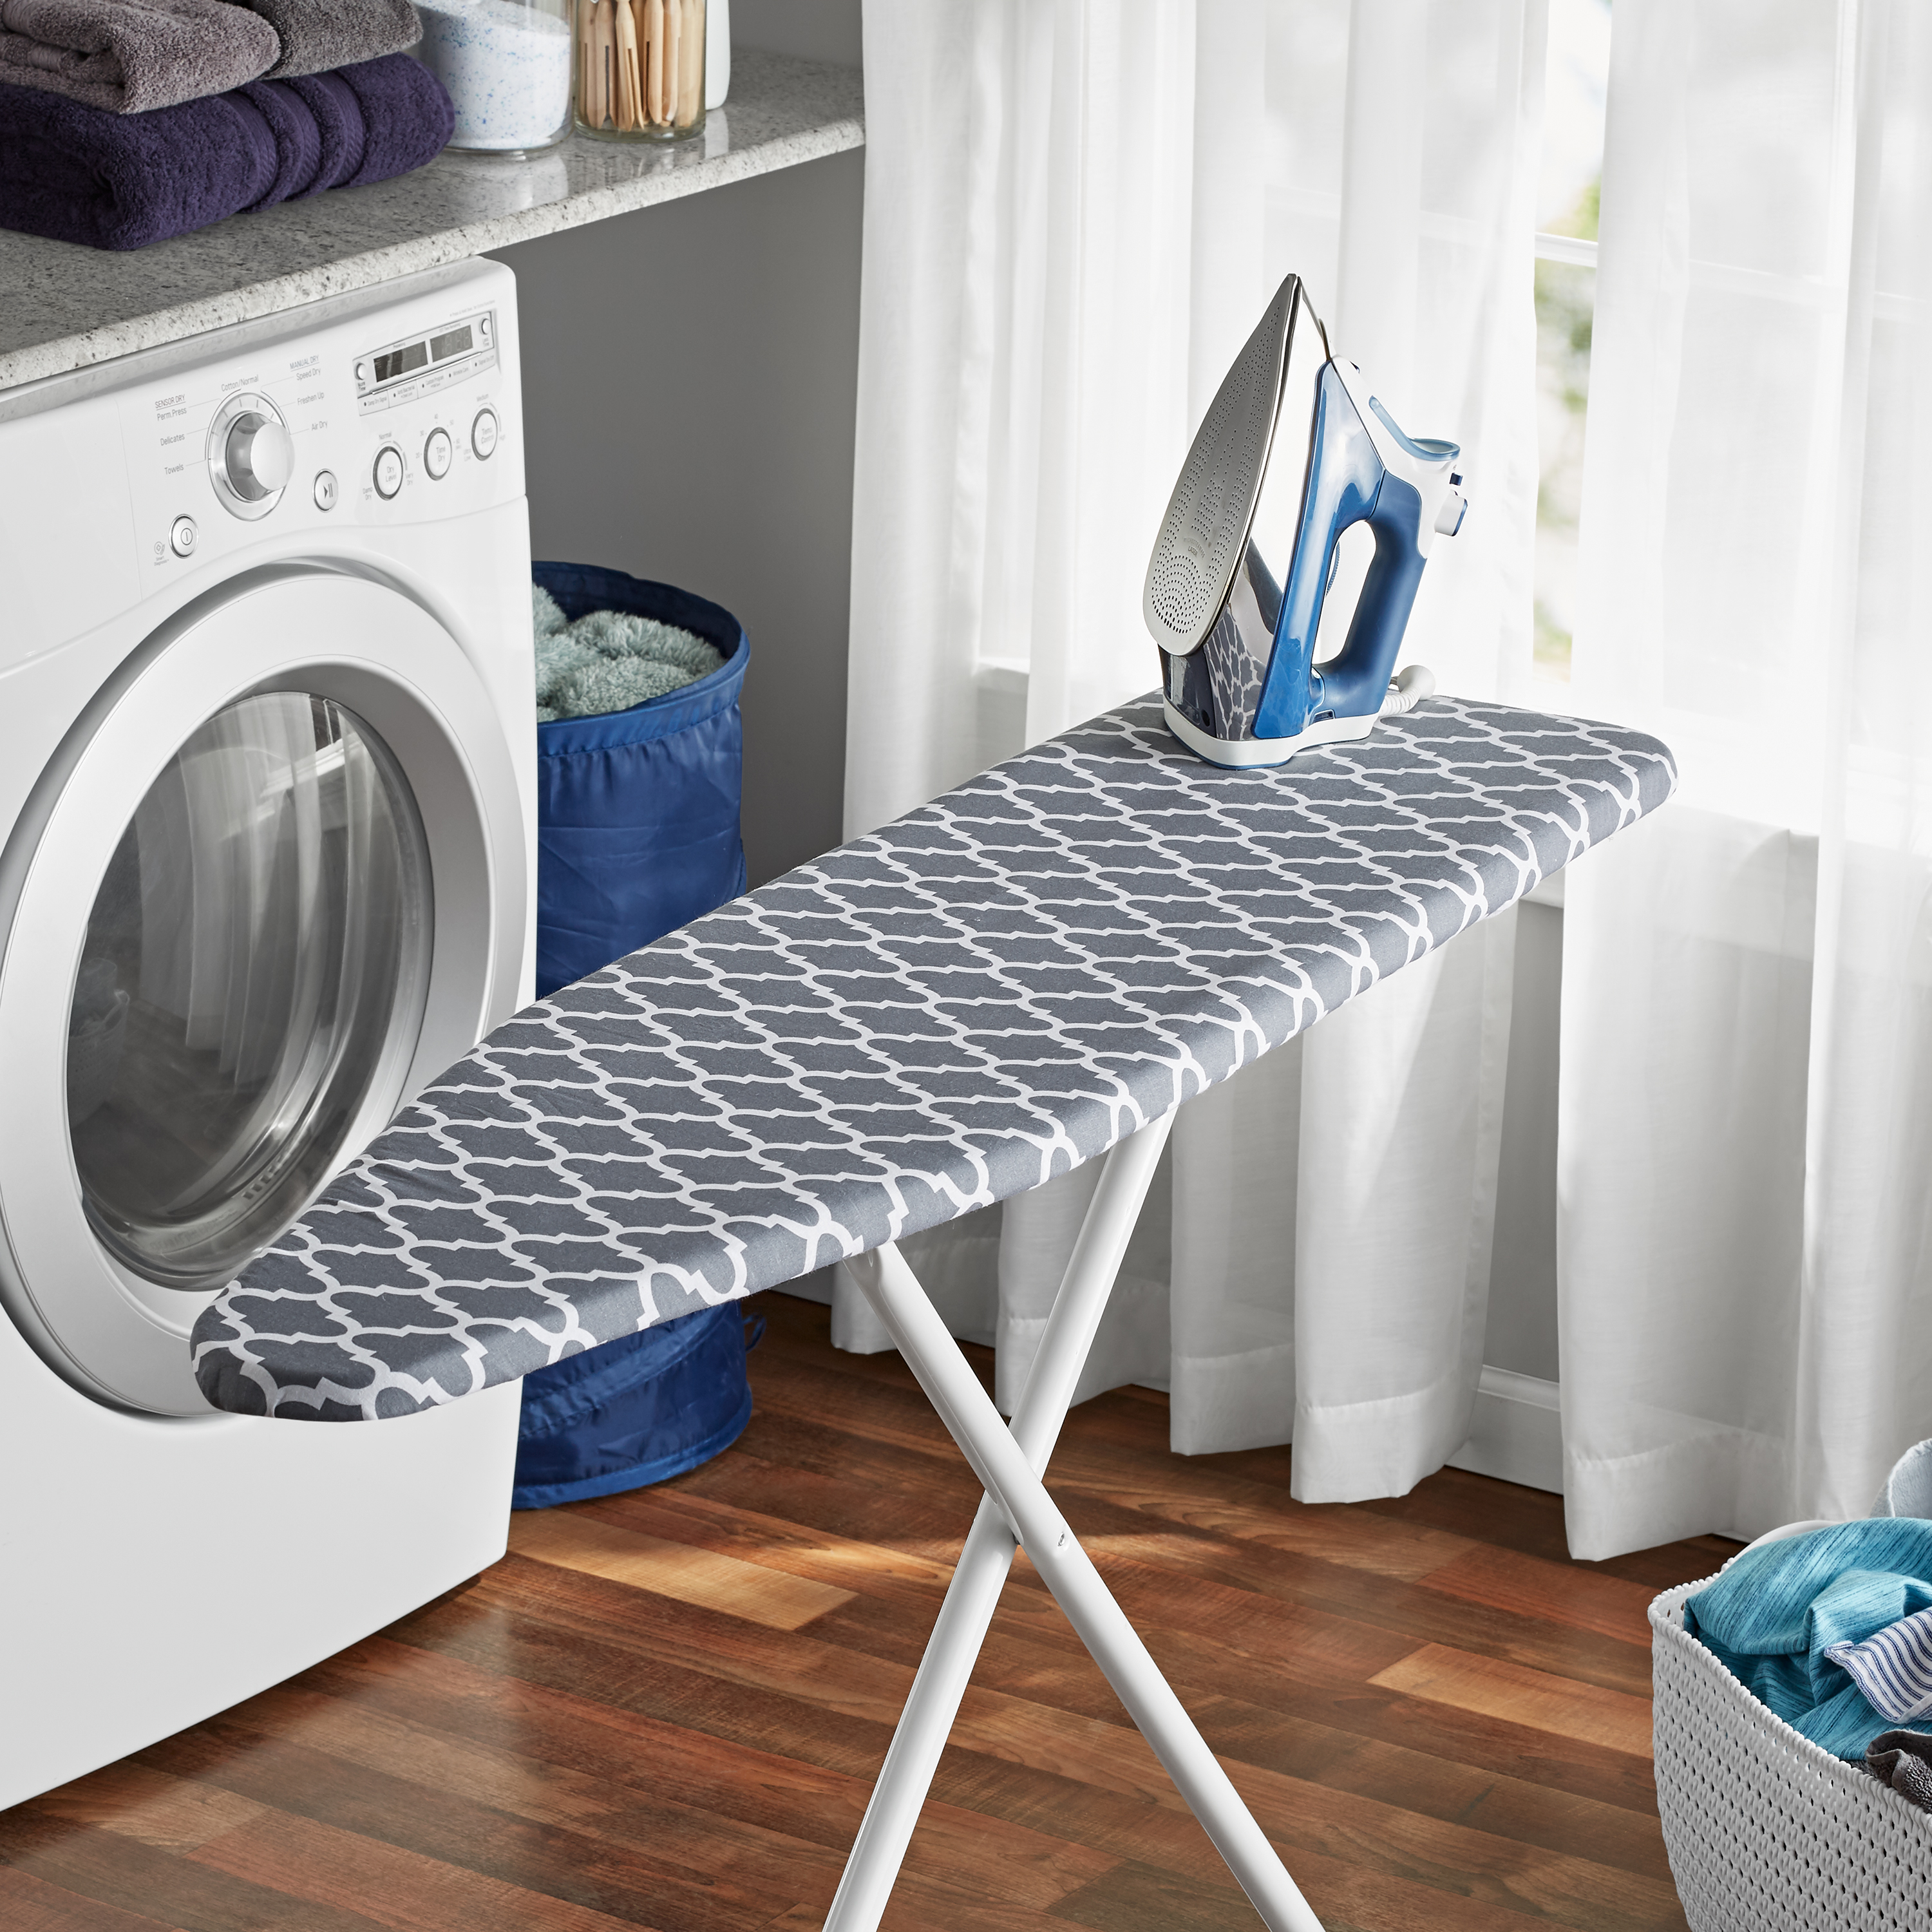 Mainstays Deluxe Lattice Grey Removable Ironing Board Cover 54" x 15" (Ironing board not included) - image 2 of 4